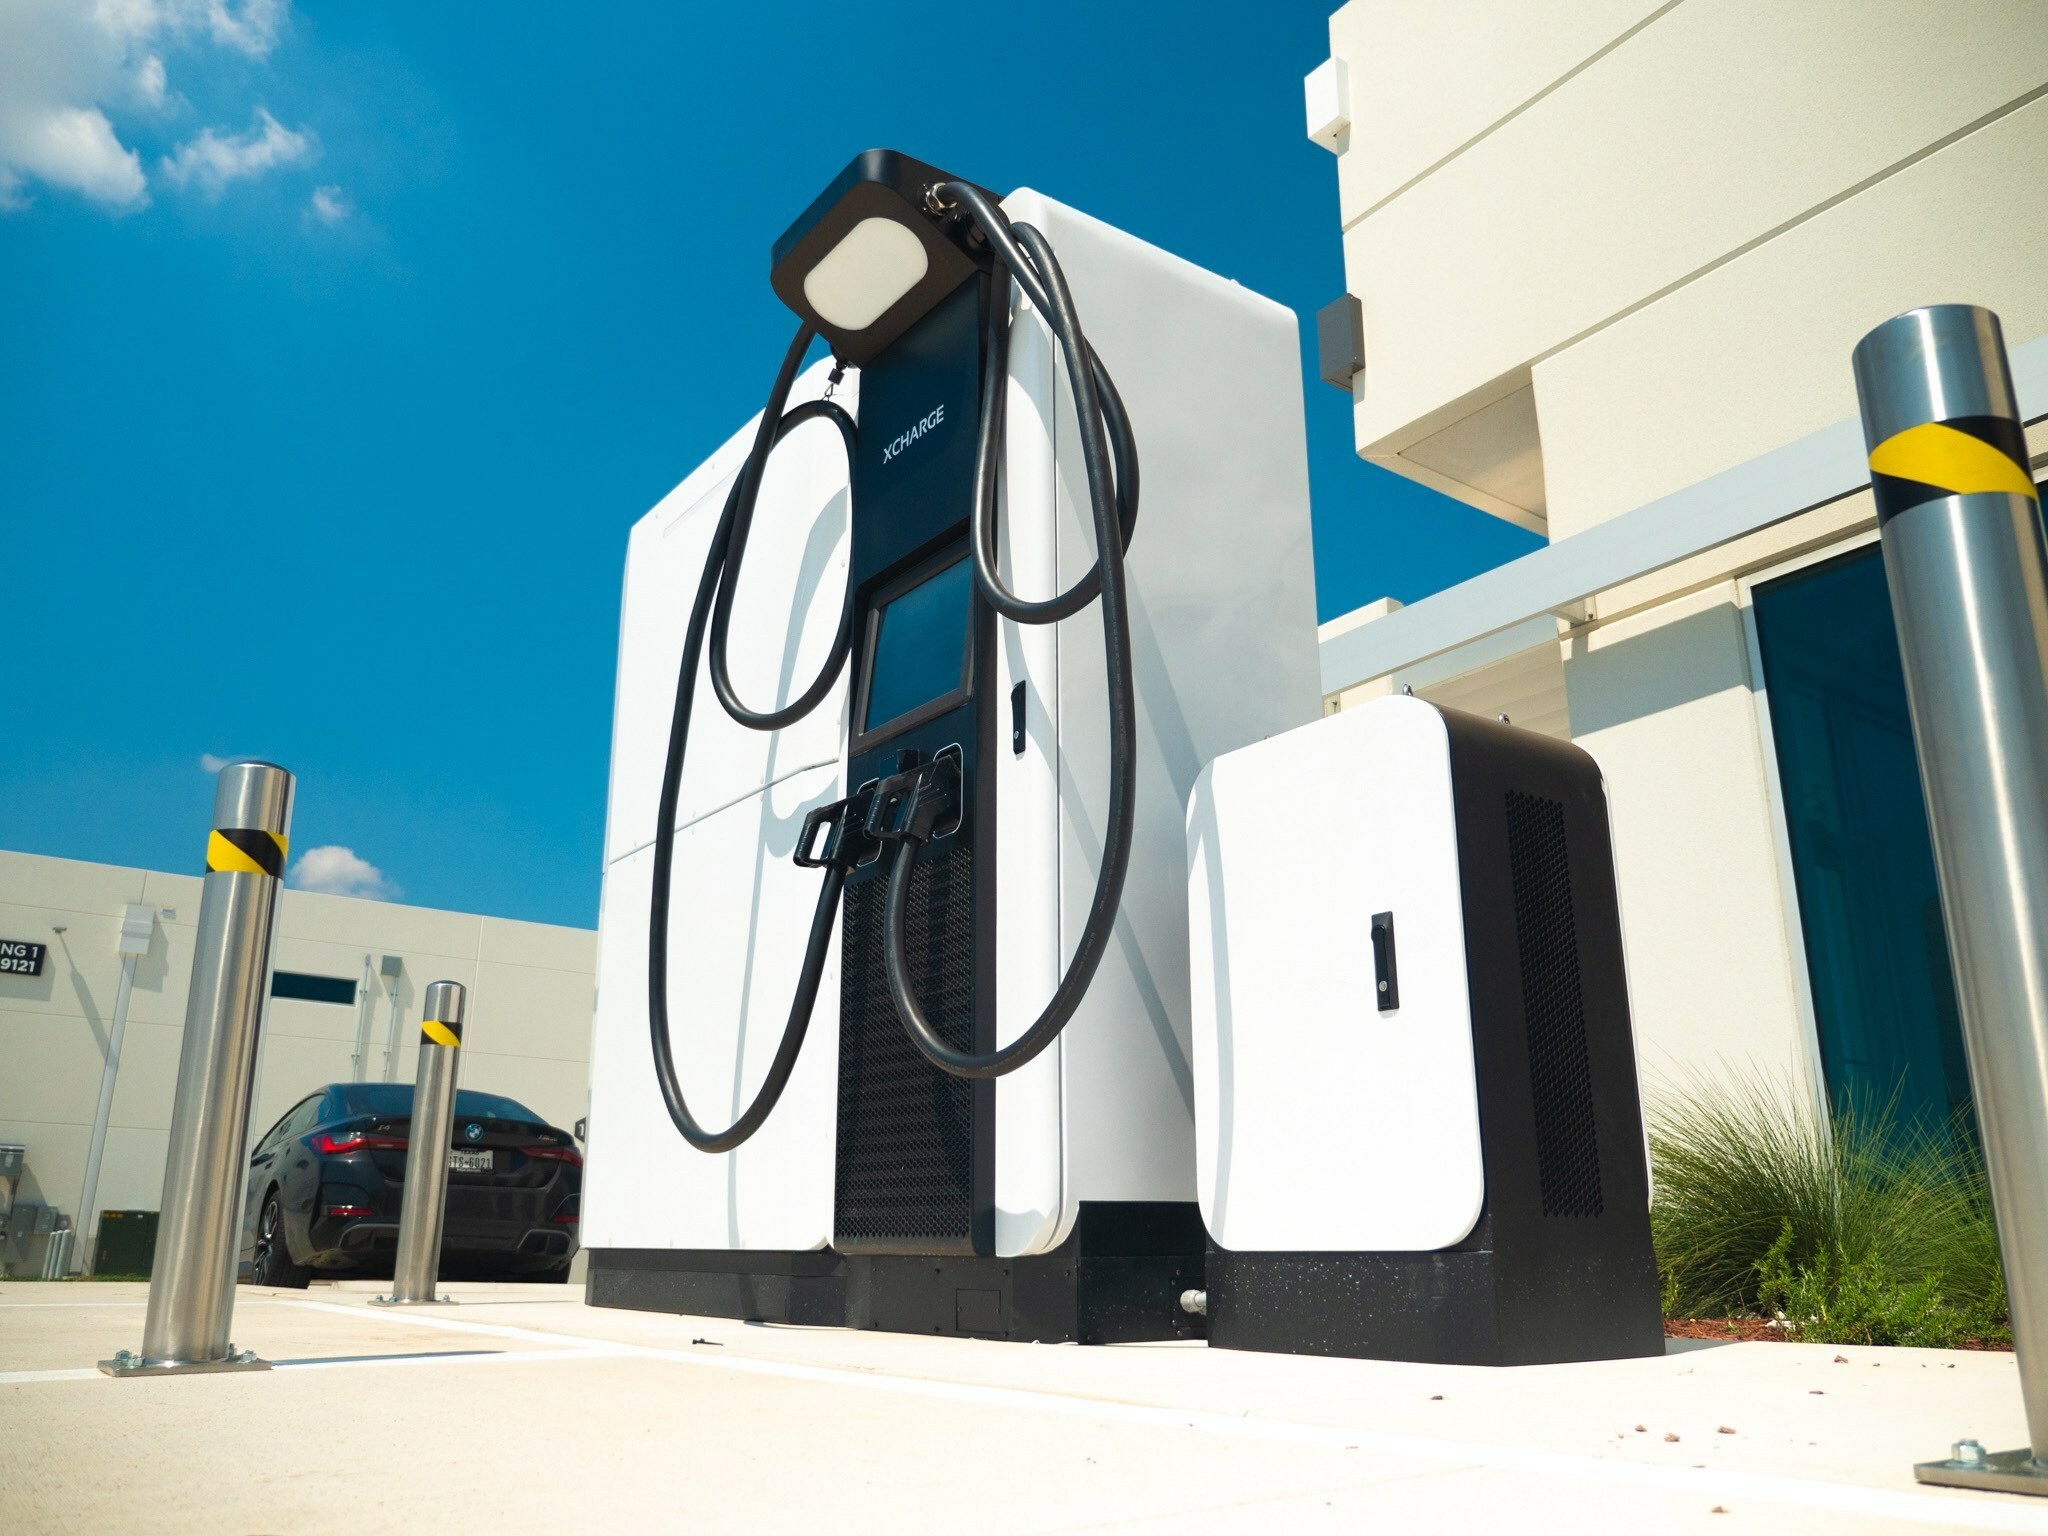 The Watters Creek Village installation will feature more than 20 bays with XCharge NA ultra-fast chargers. Photo: XCharge North America